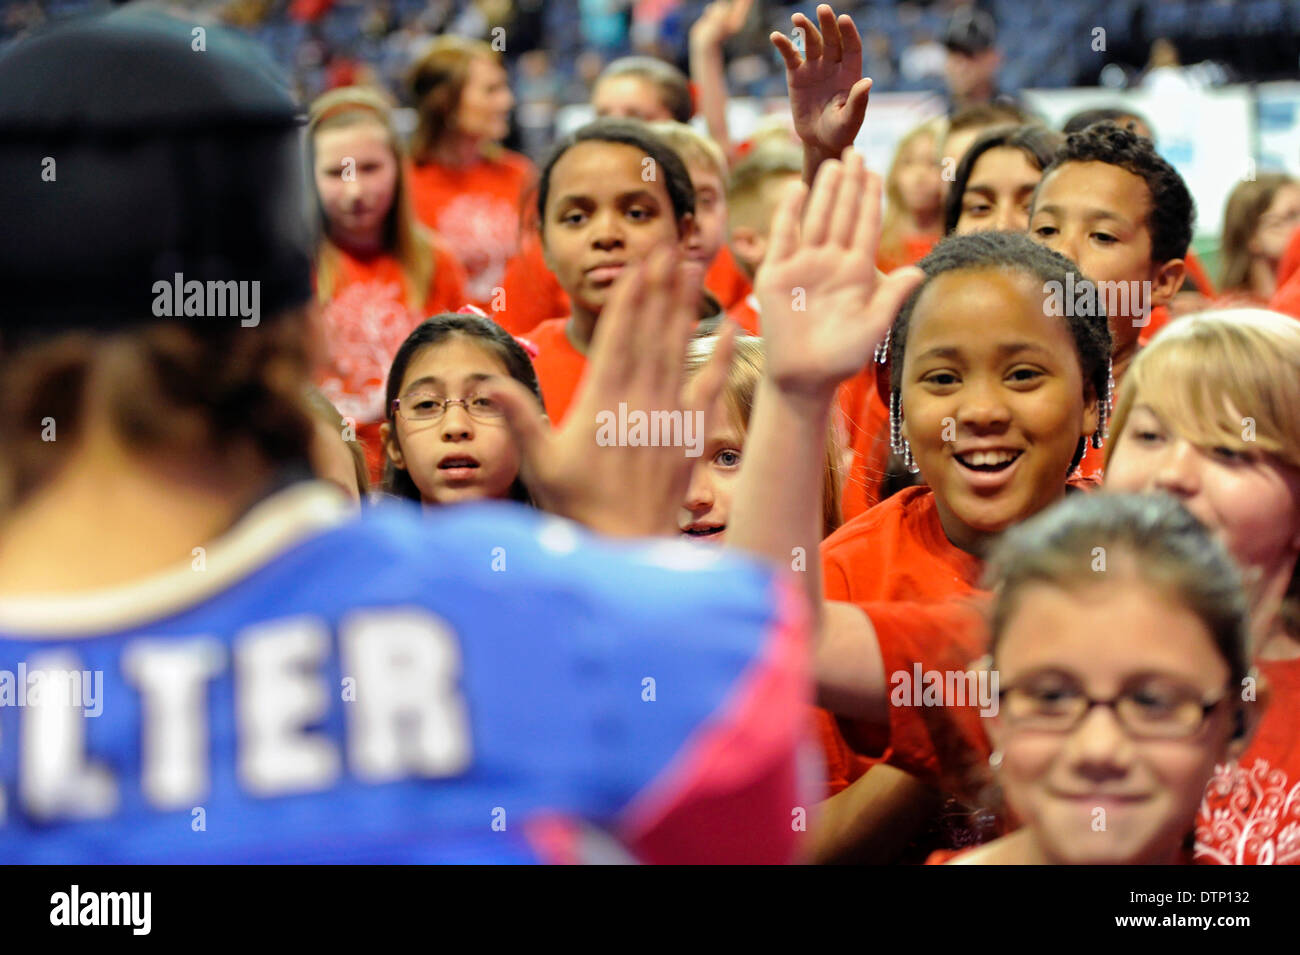 Allen, TX, USA. 21st Feb, 2014. Texas Revolution running back Jennifer Welter high-fives kids as the exit the field prior to the Revolution playing the Cedar Rapids Titans in an Indoor Football League game at the Allen Event Center Friday, February 21, 2014, in Allen, Texas. The 5-foot-2-inch, 130 pound Welter is the first woman to play professional football at a position other than kicker, she made the final roster of the Texas Revolution of the Indoor Football League, as a running back. © csm/Alamy Live News Stock Photo